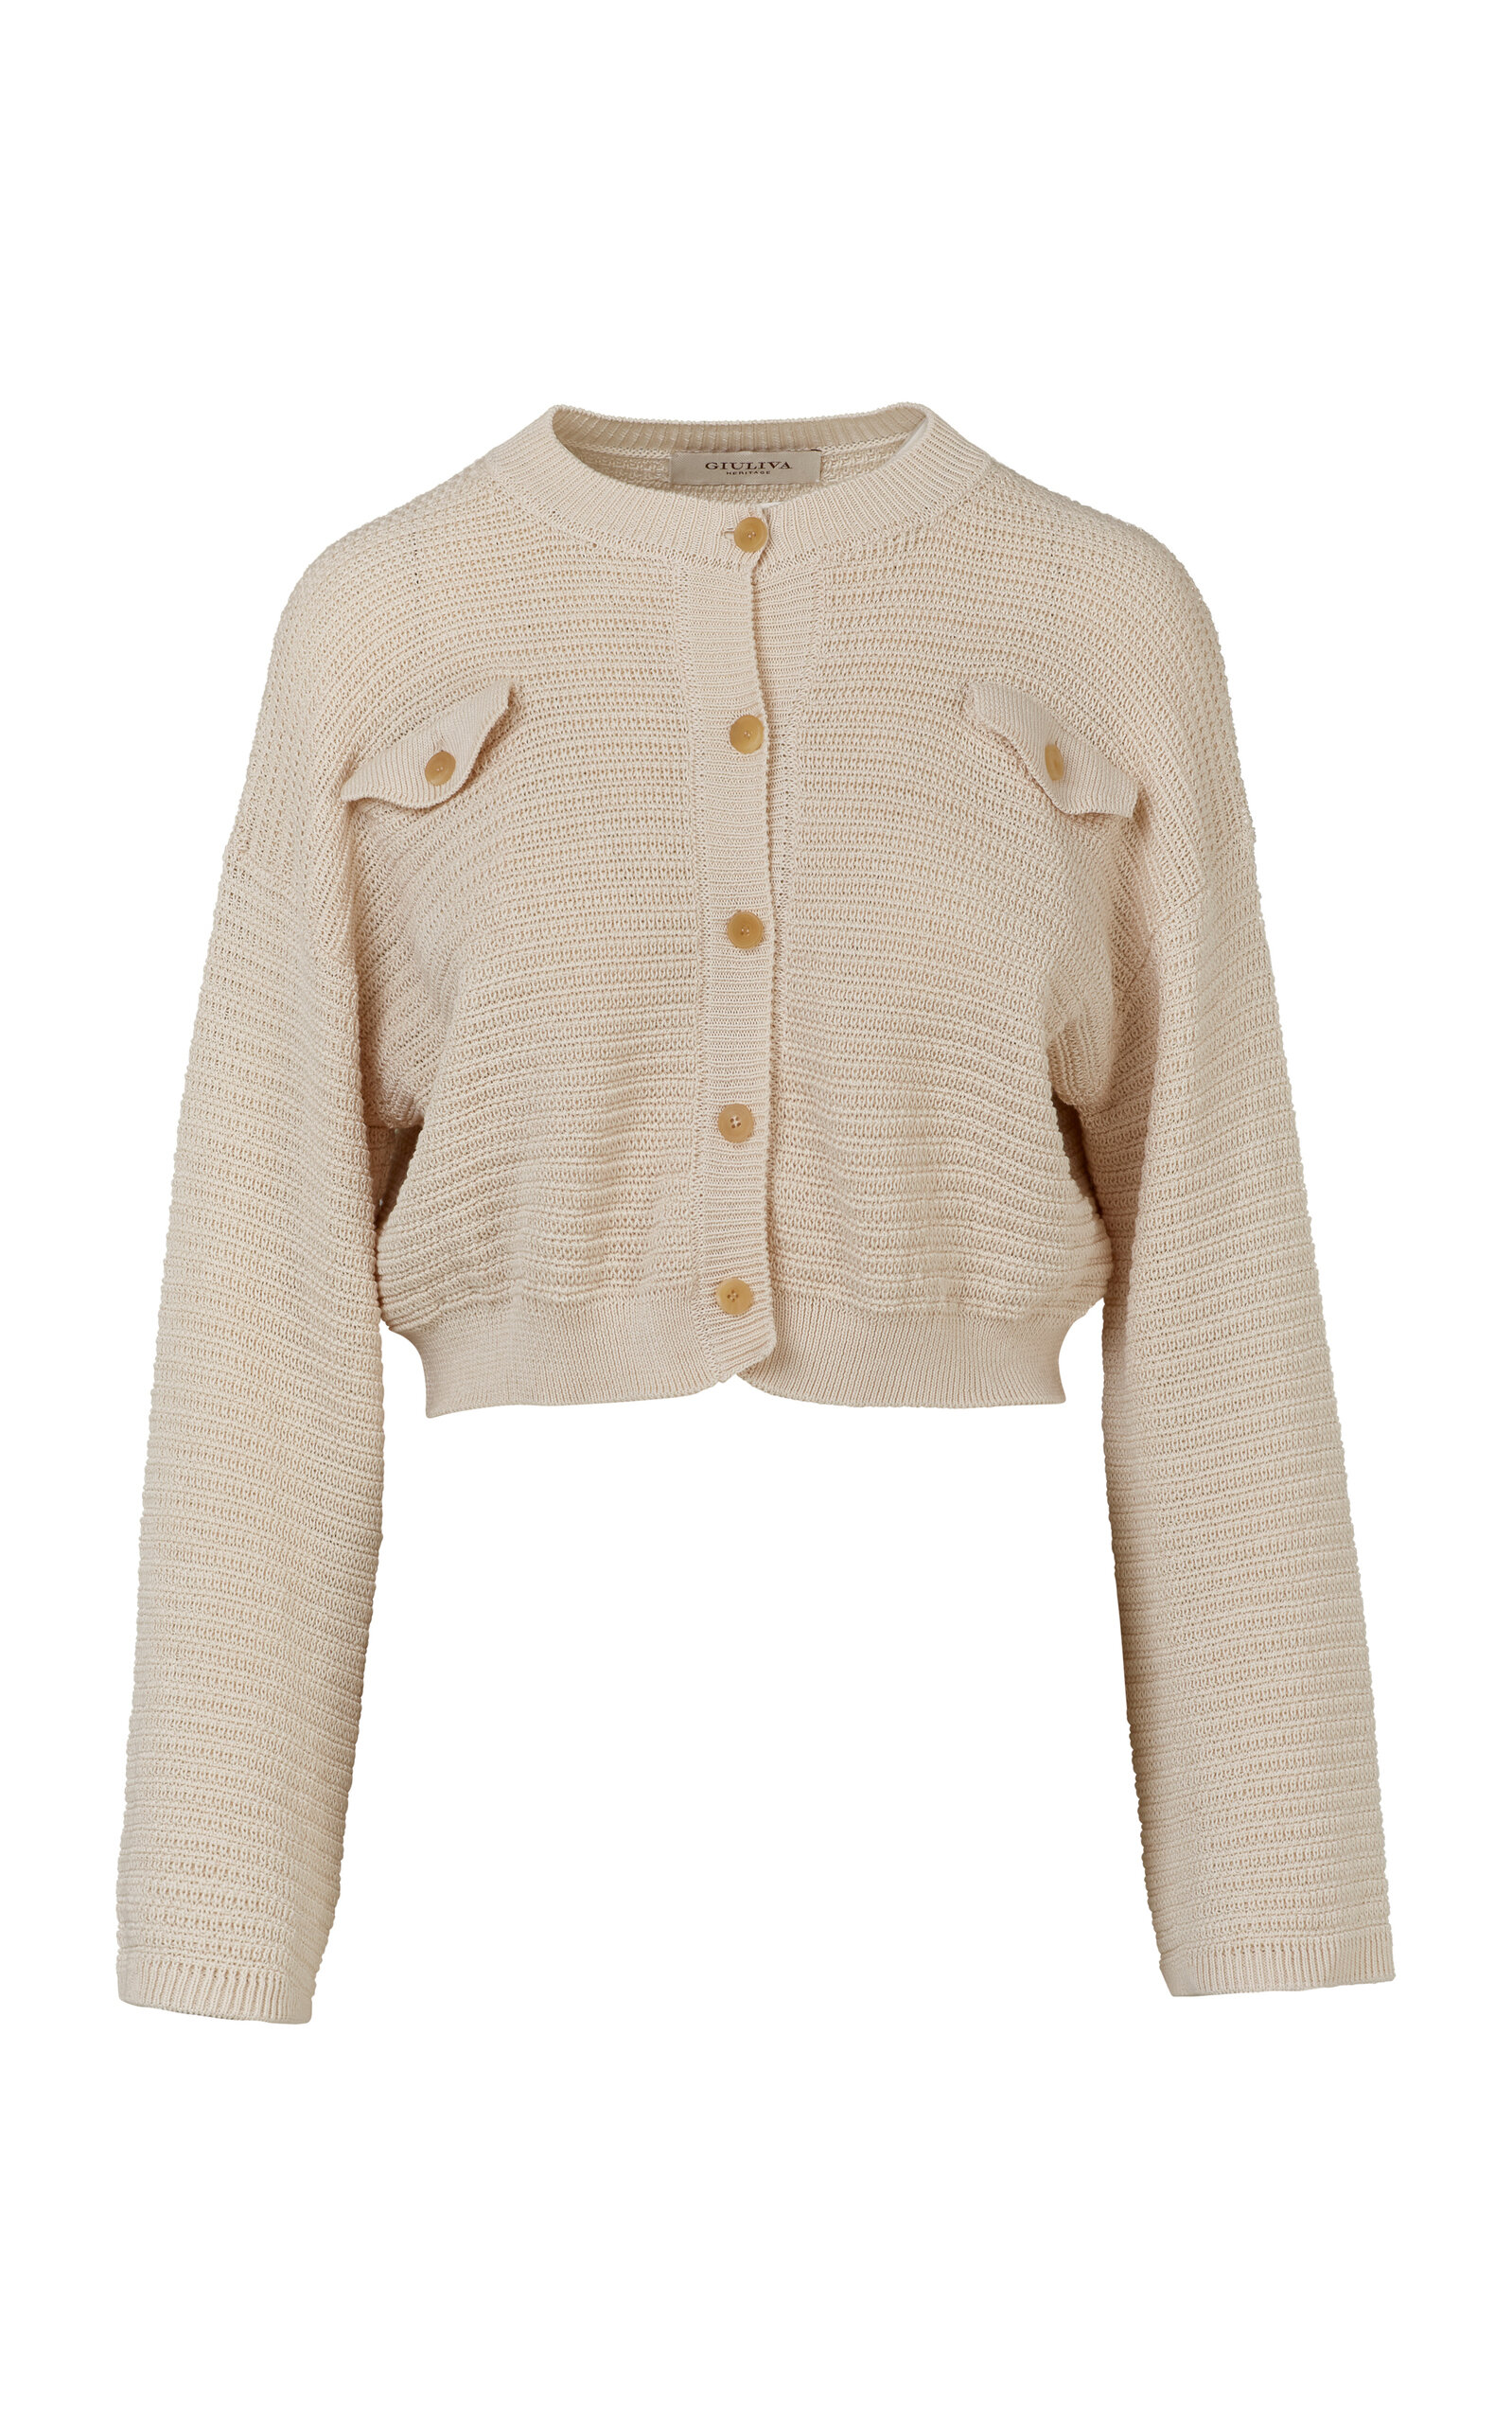 The Corinne Cropped Cotton-Knit Cardigan